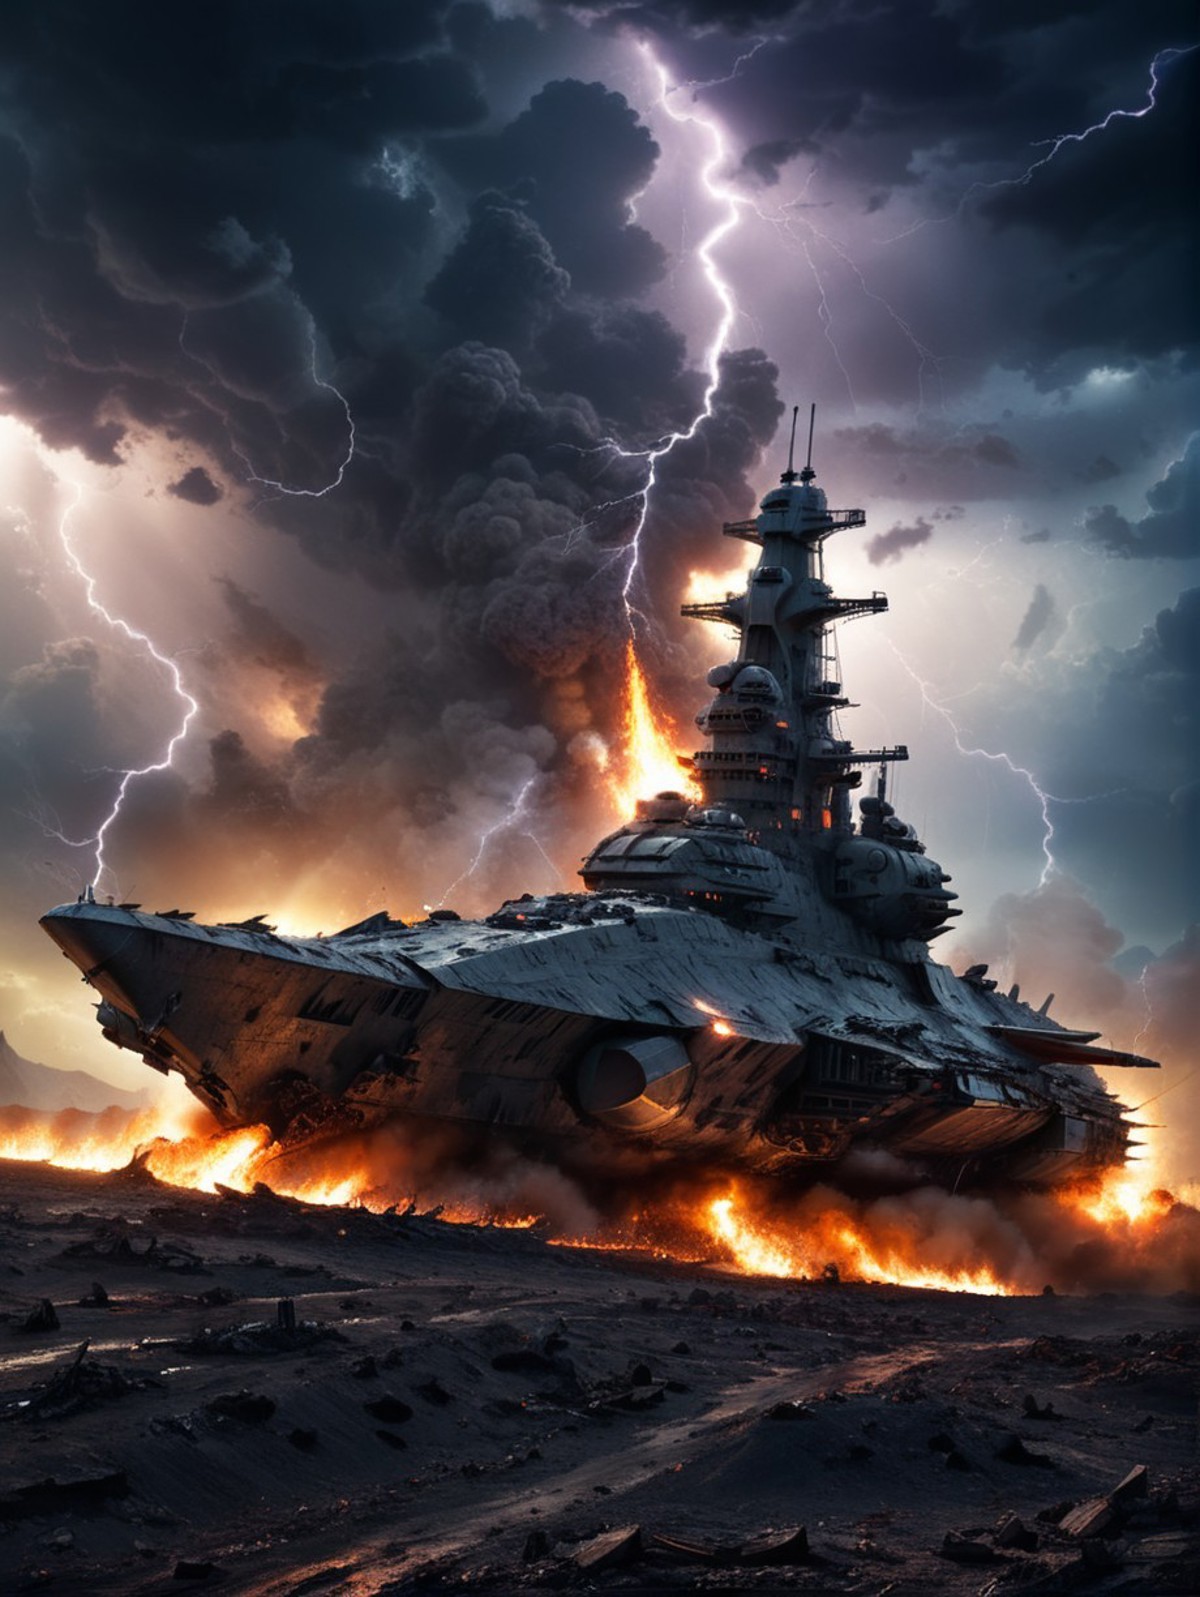 A large battleship with flames surrounding it and lightning striking it.